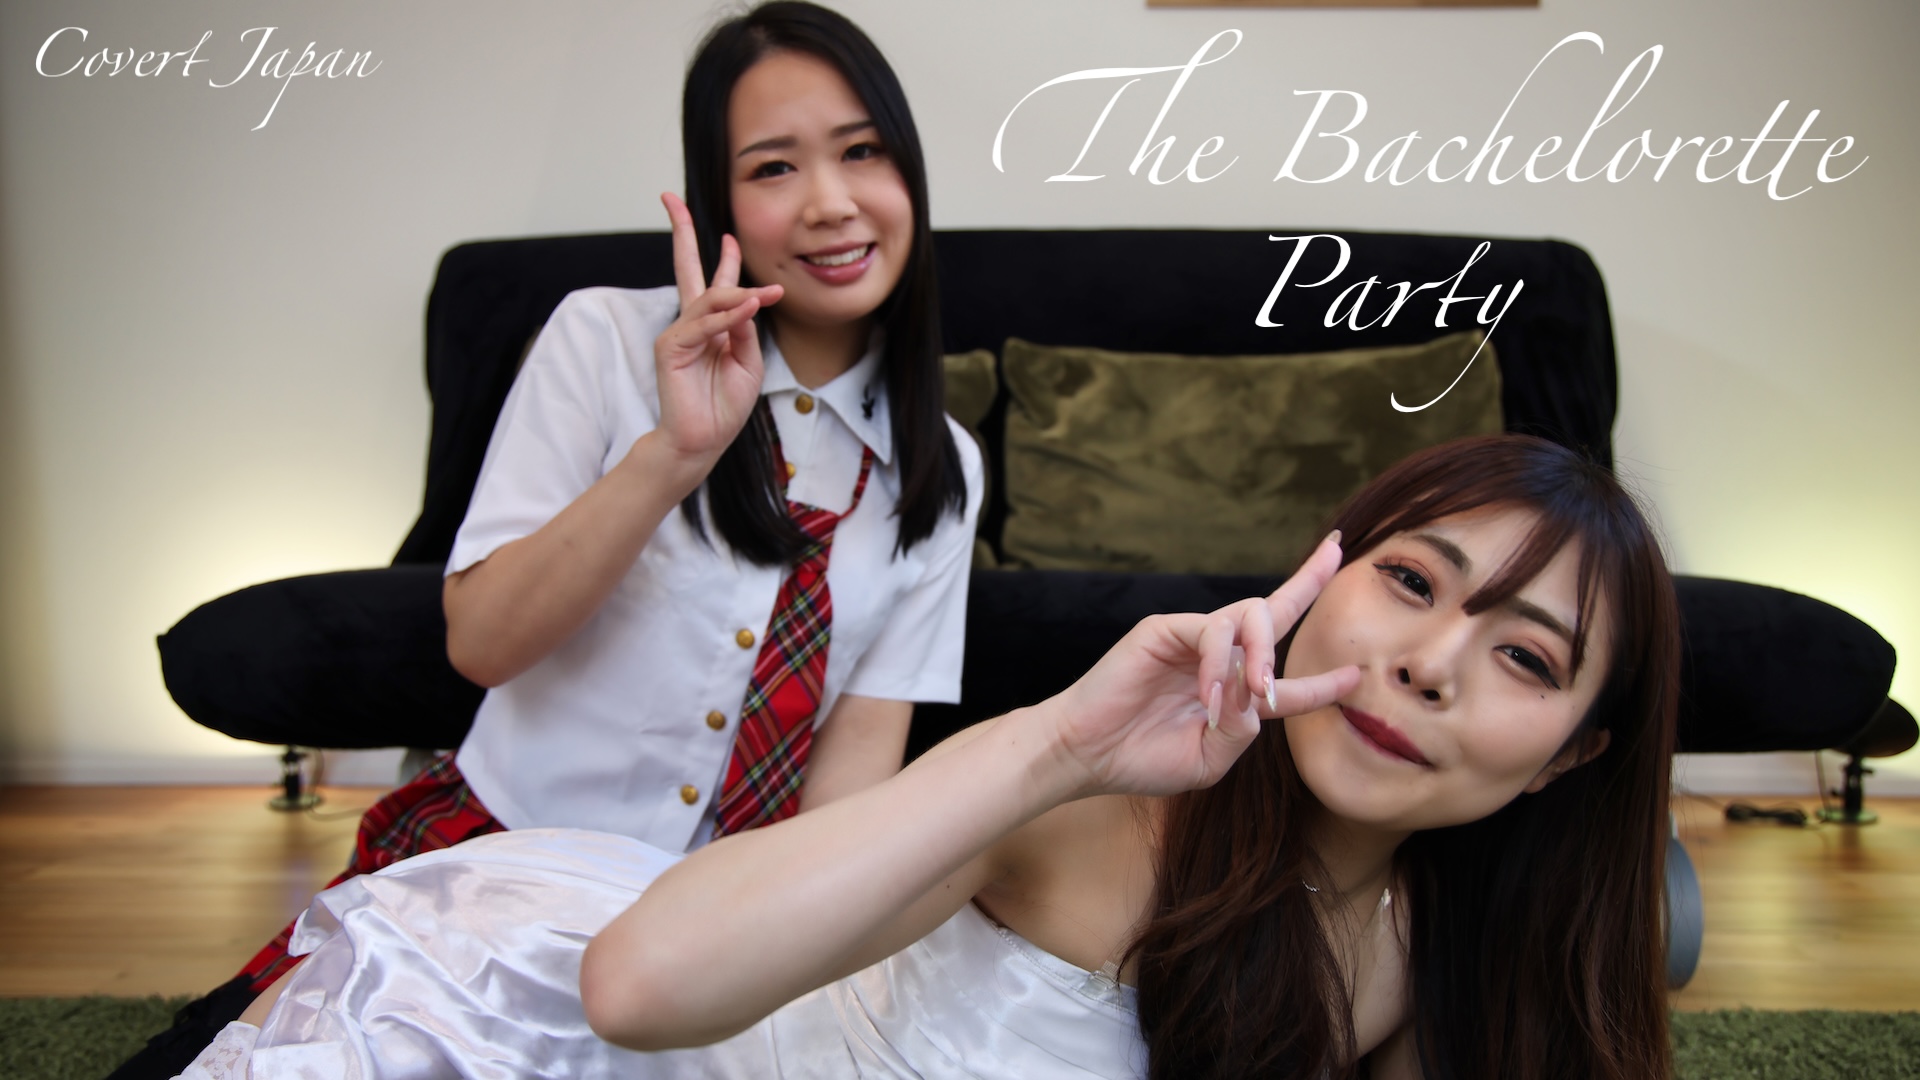 Misa, Mitsuka “The Bachelorette Party” CovertJapan